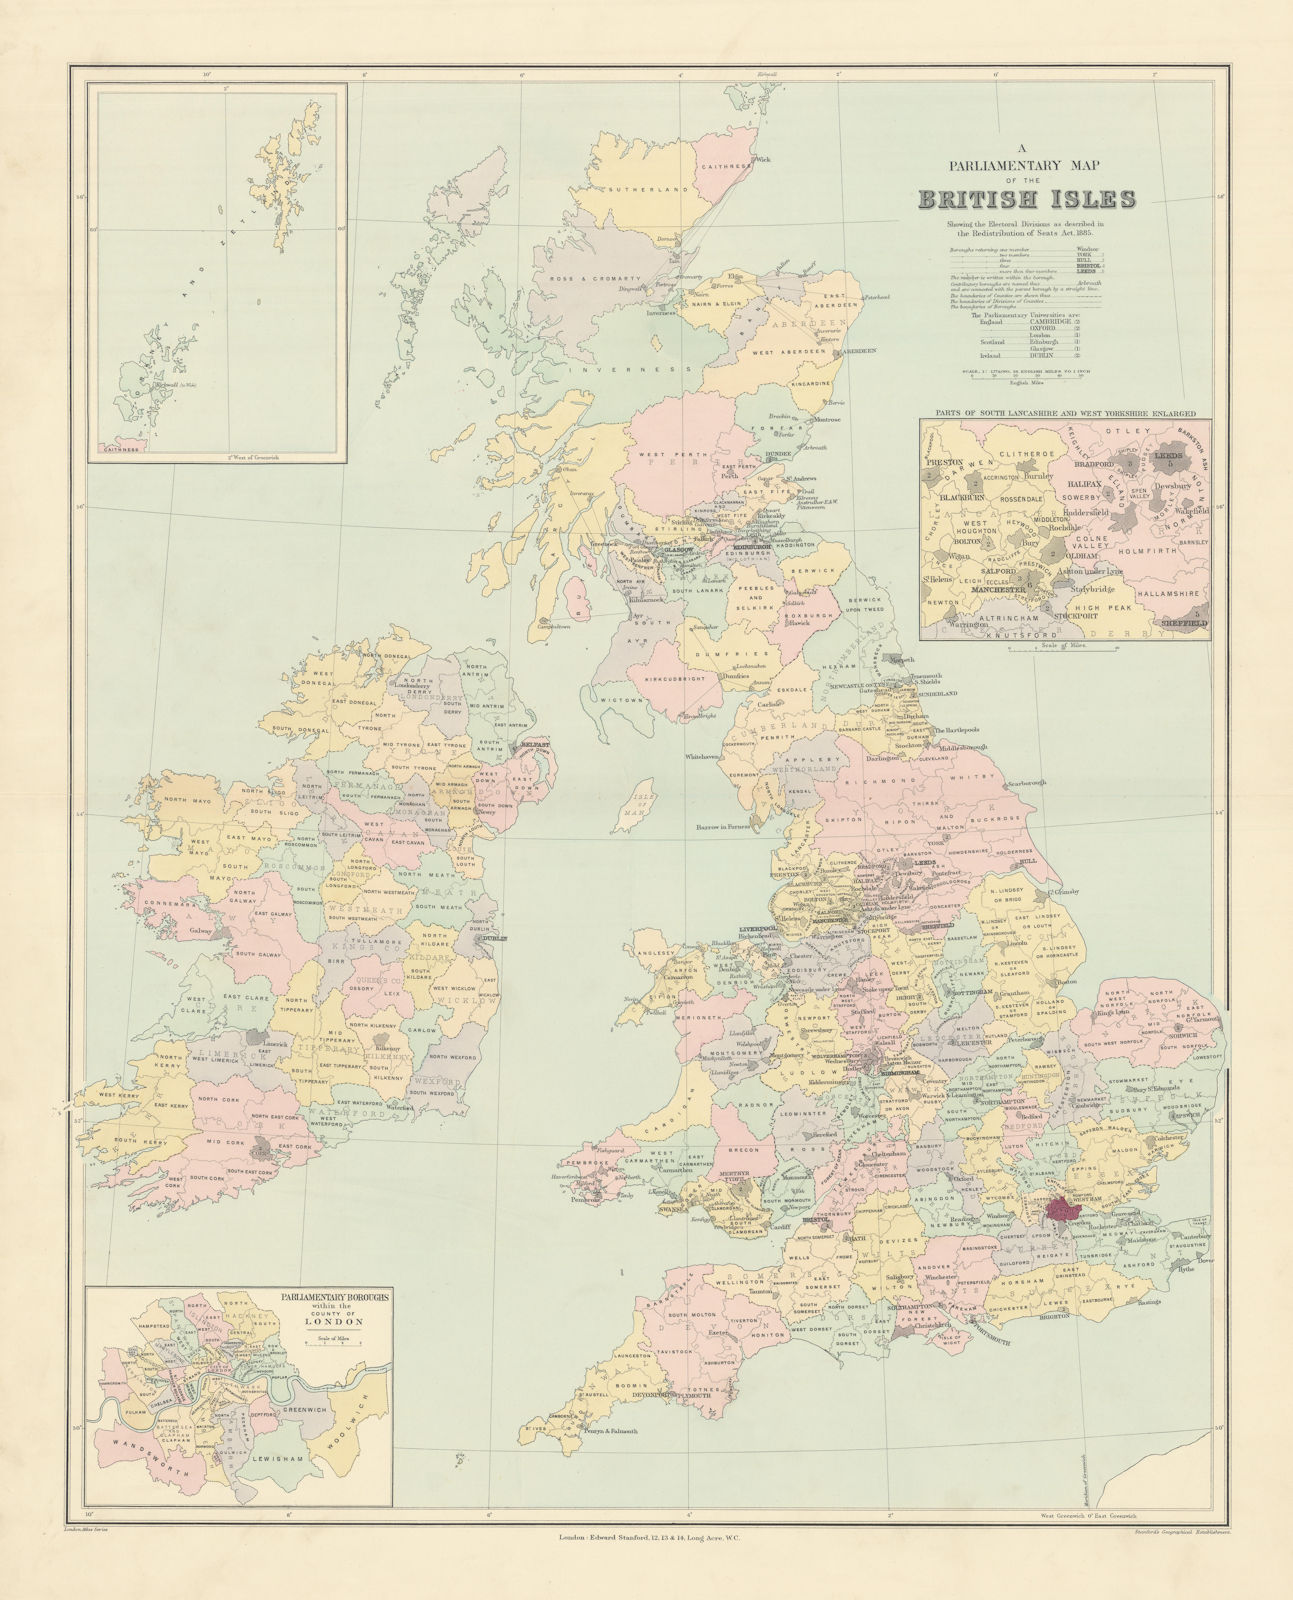 British Isles Parliamentary constituencies. Large 64x51cm. STANFORD 1904 map